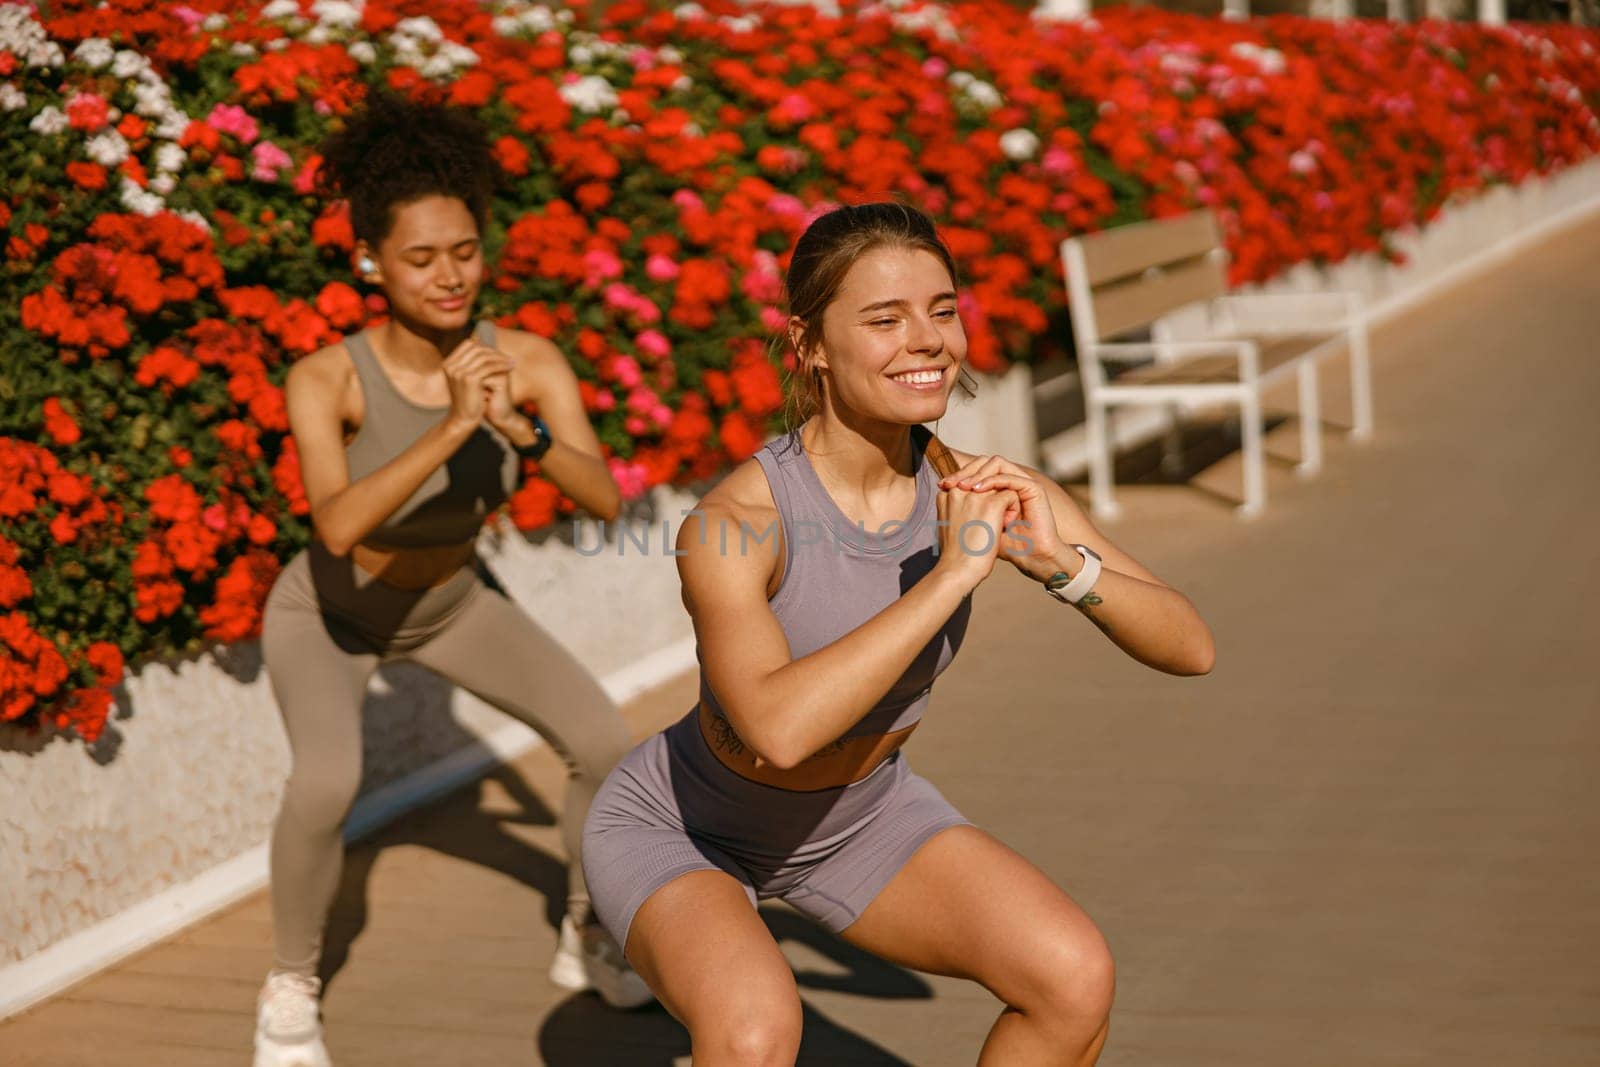 Two smiling fit women doing workout and squatting together outdoors. Active lifestyle concept